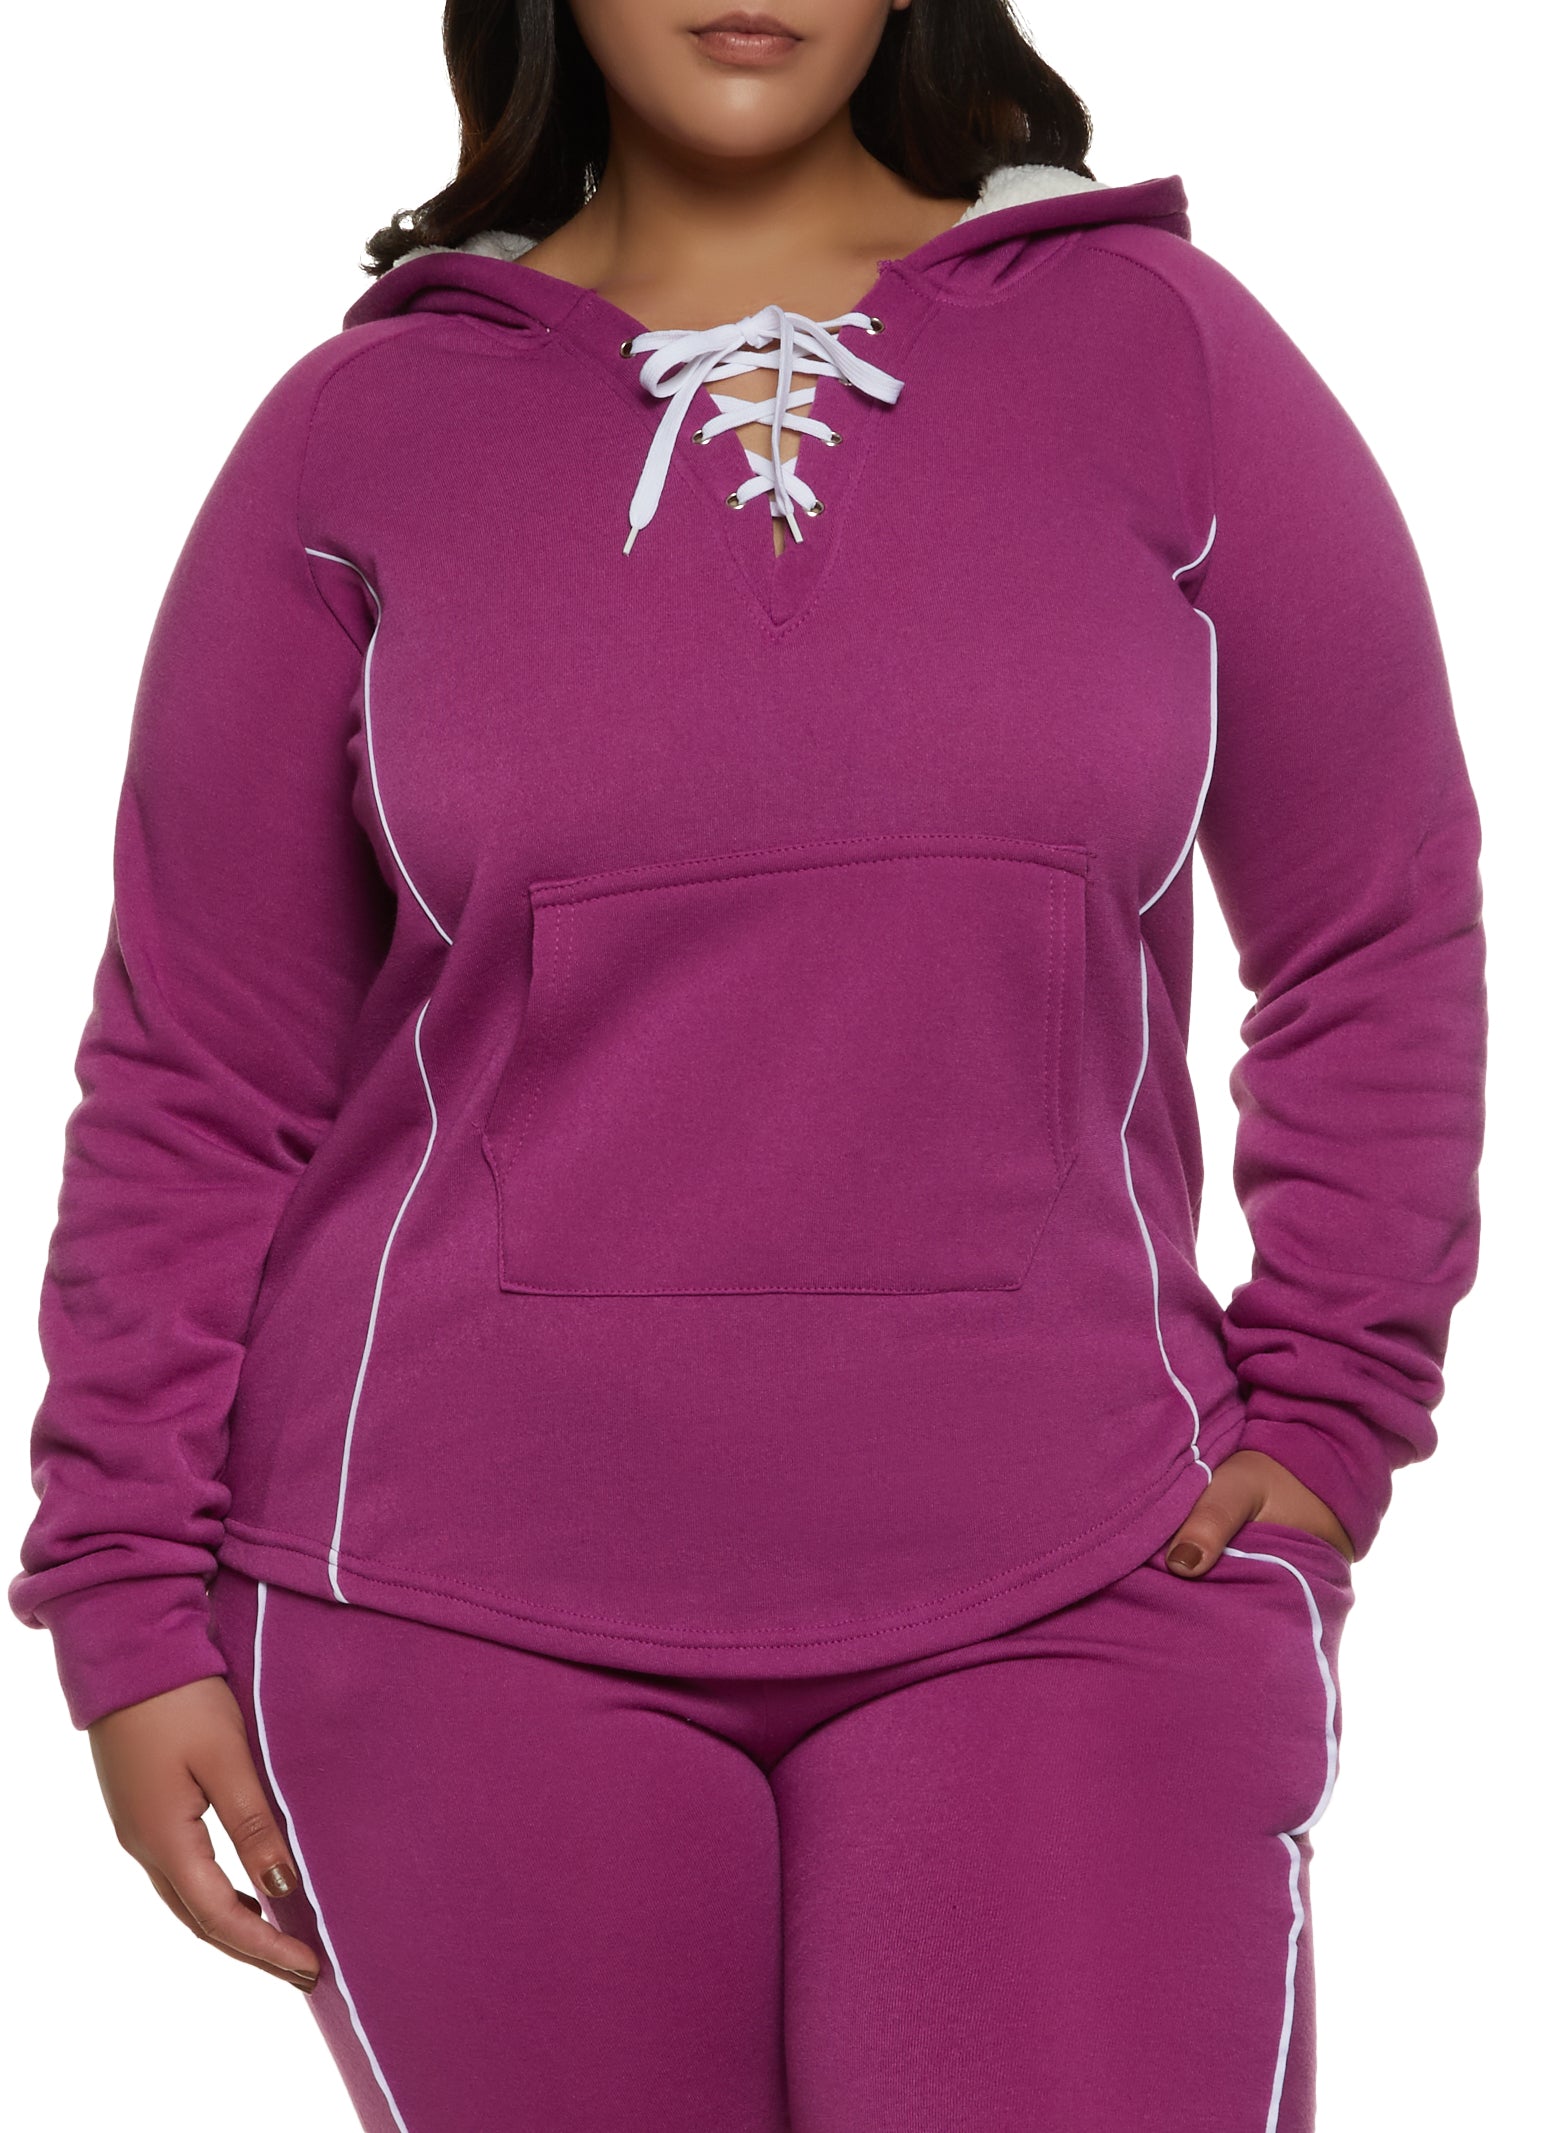 Rainbow Shops Womens Plus Size Contrast Piping Hooded Lace Up Sweatshirt,  Purple, Size 2X